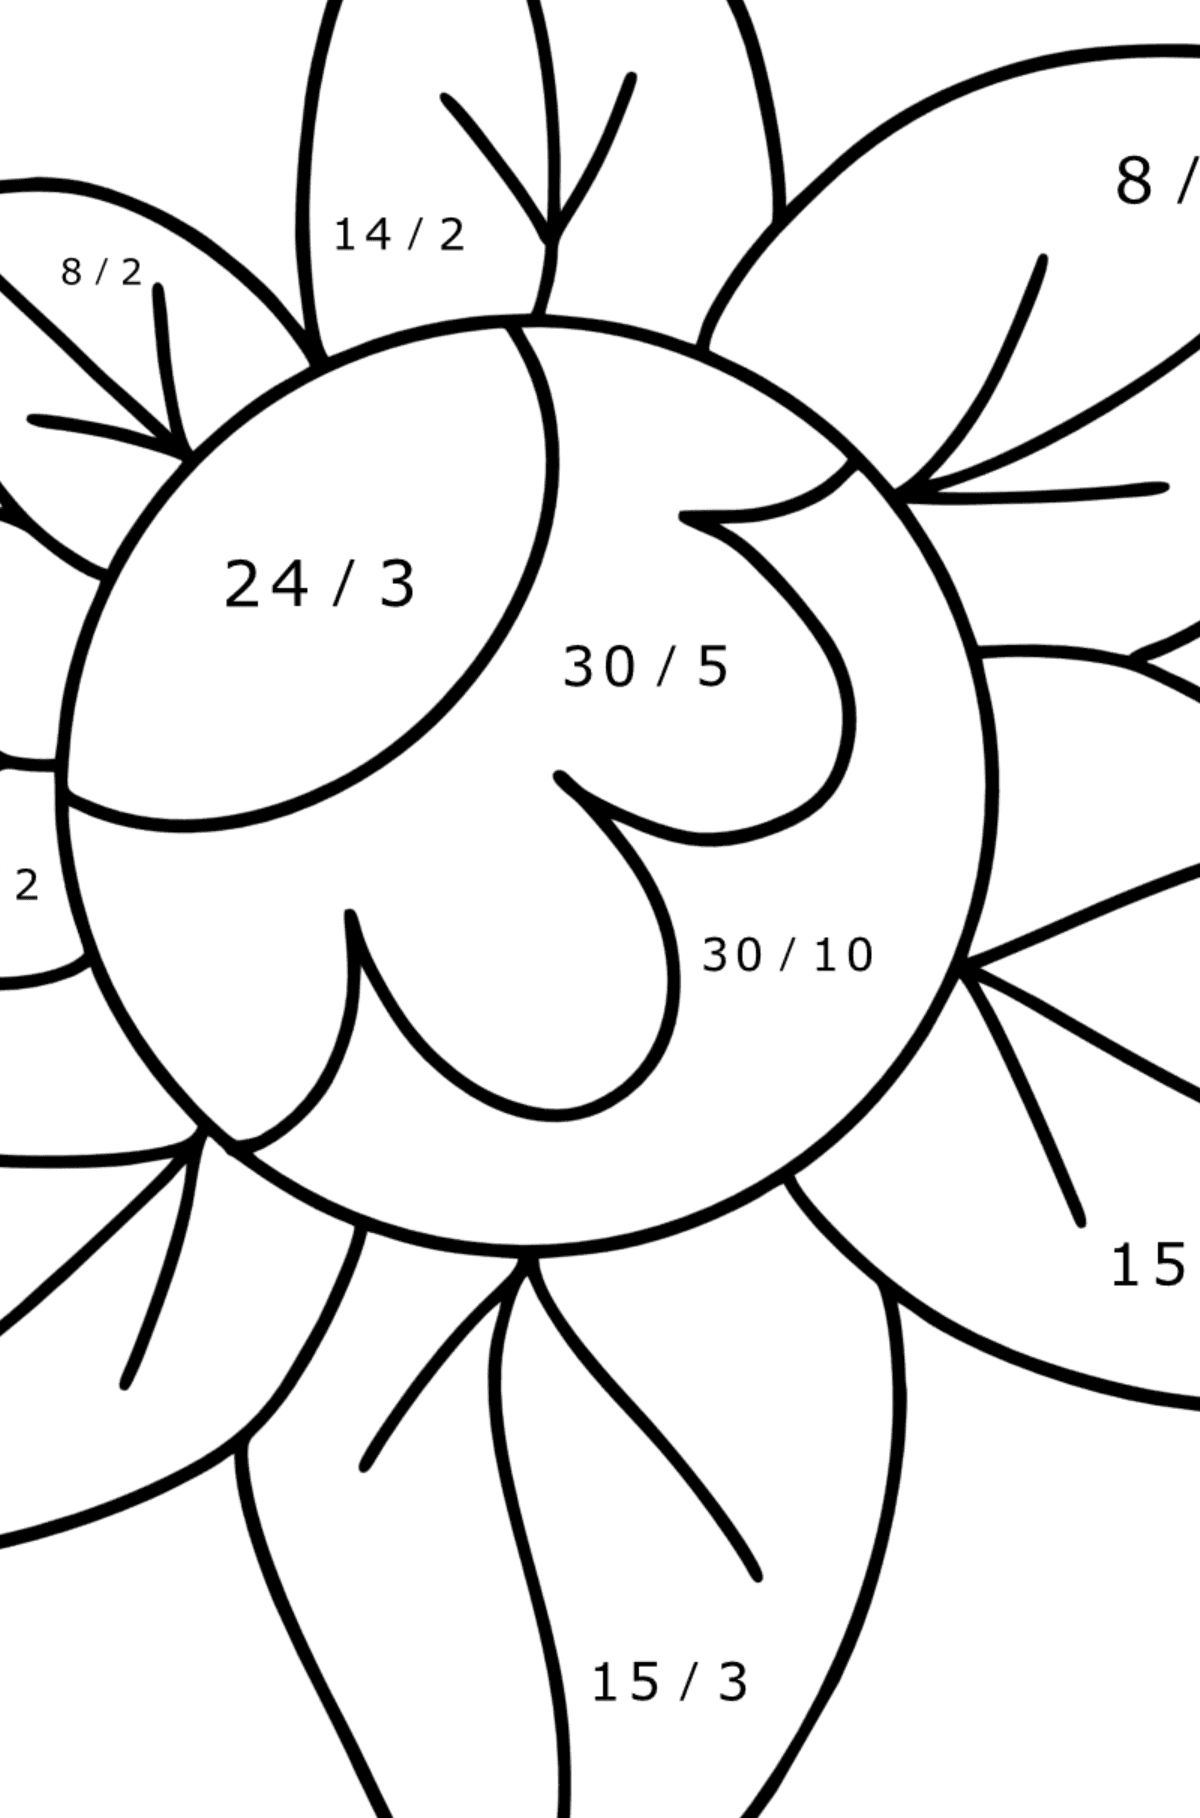 Zentangle Art flower coloring page - Math Coloring - Division for Kids